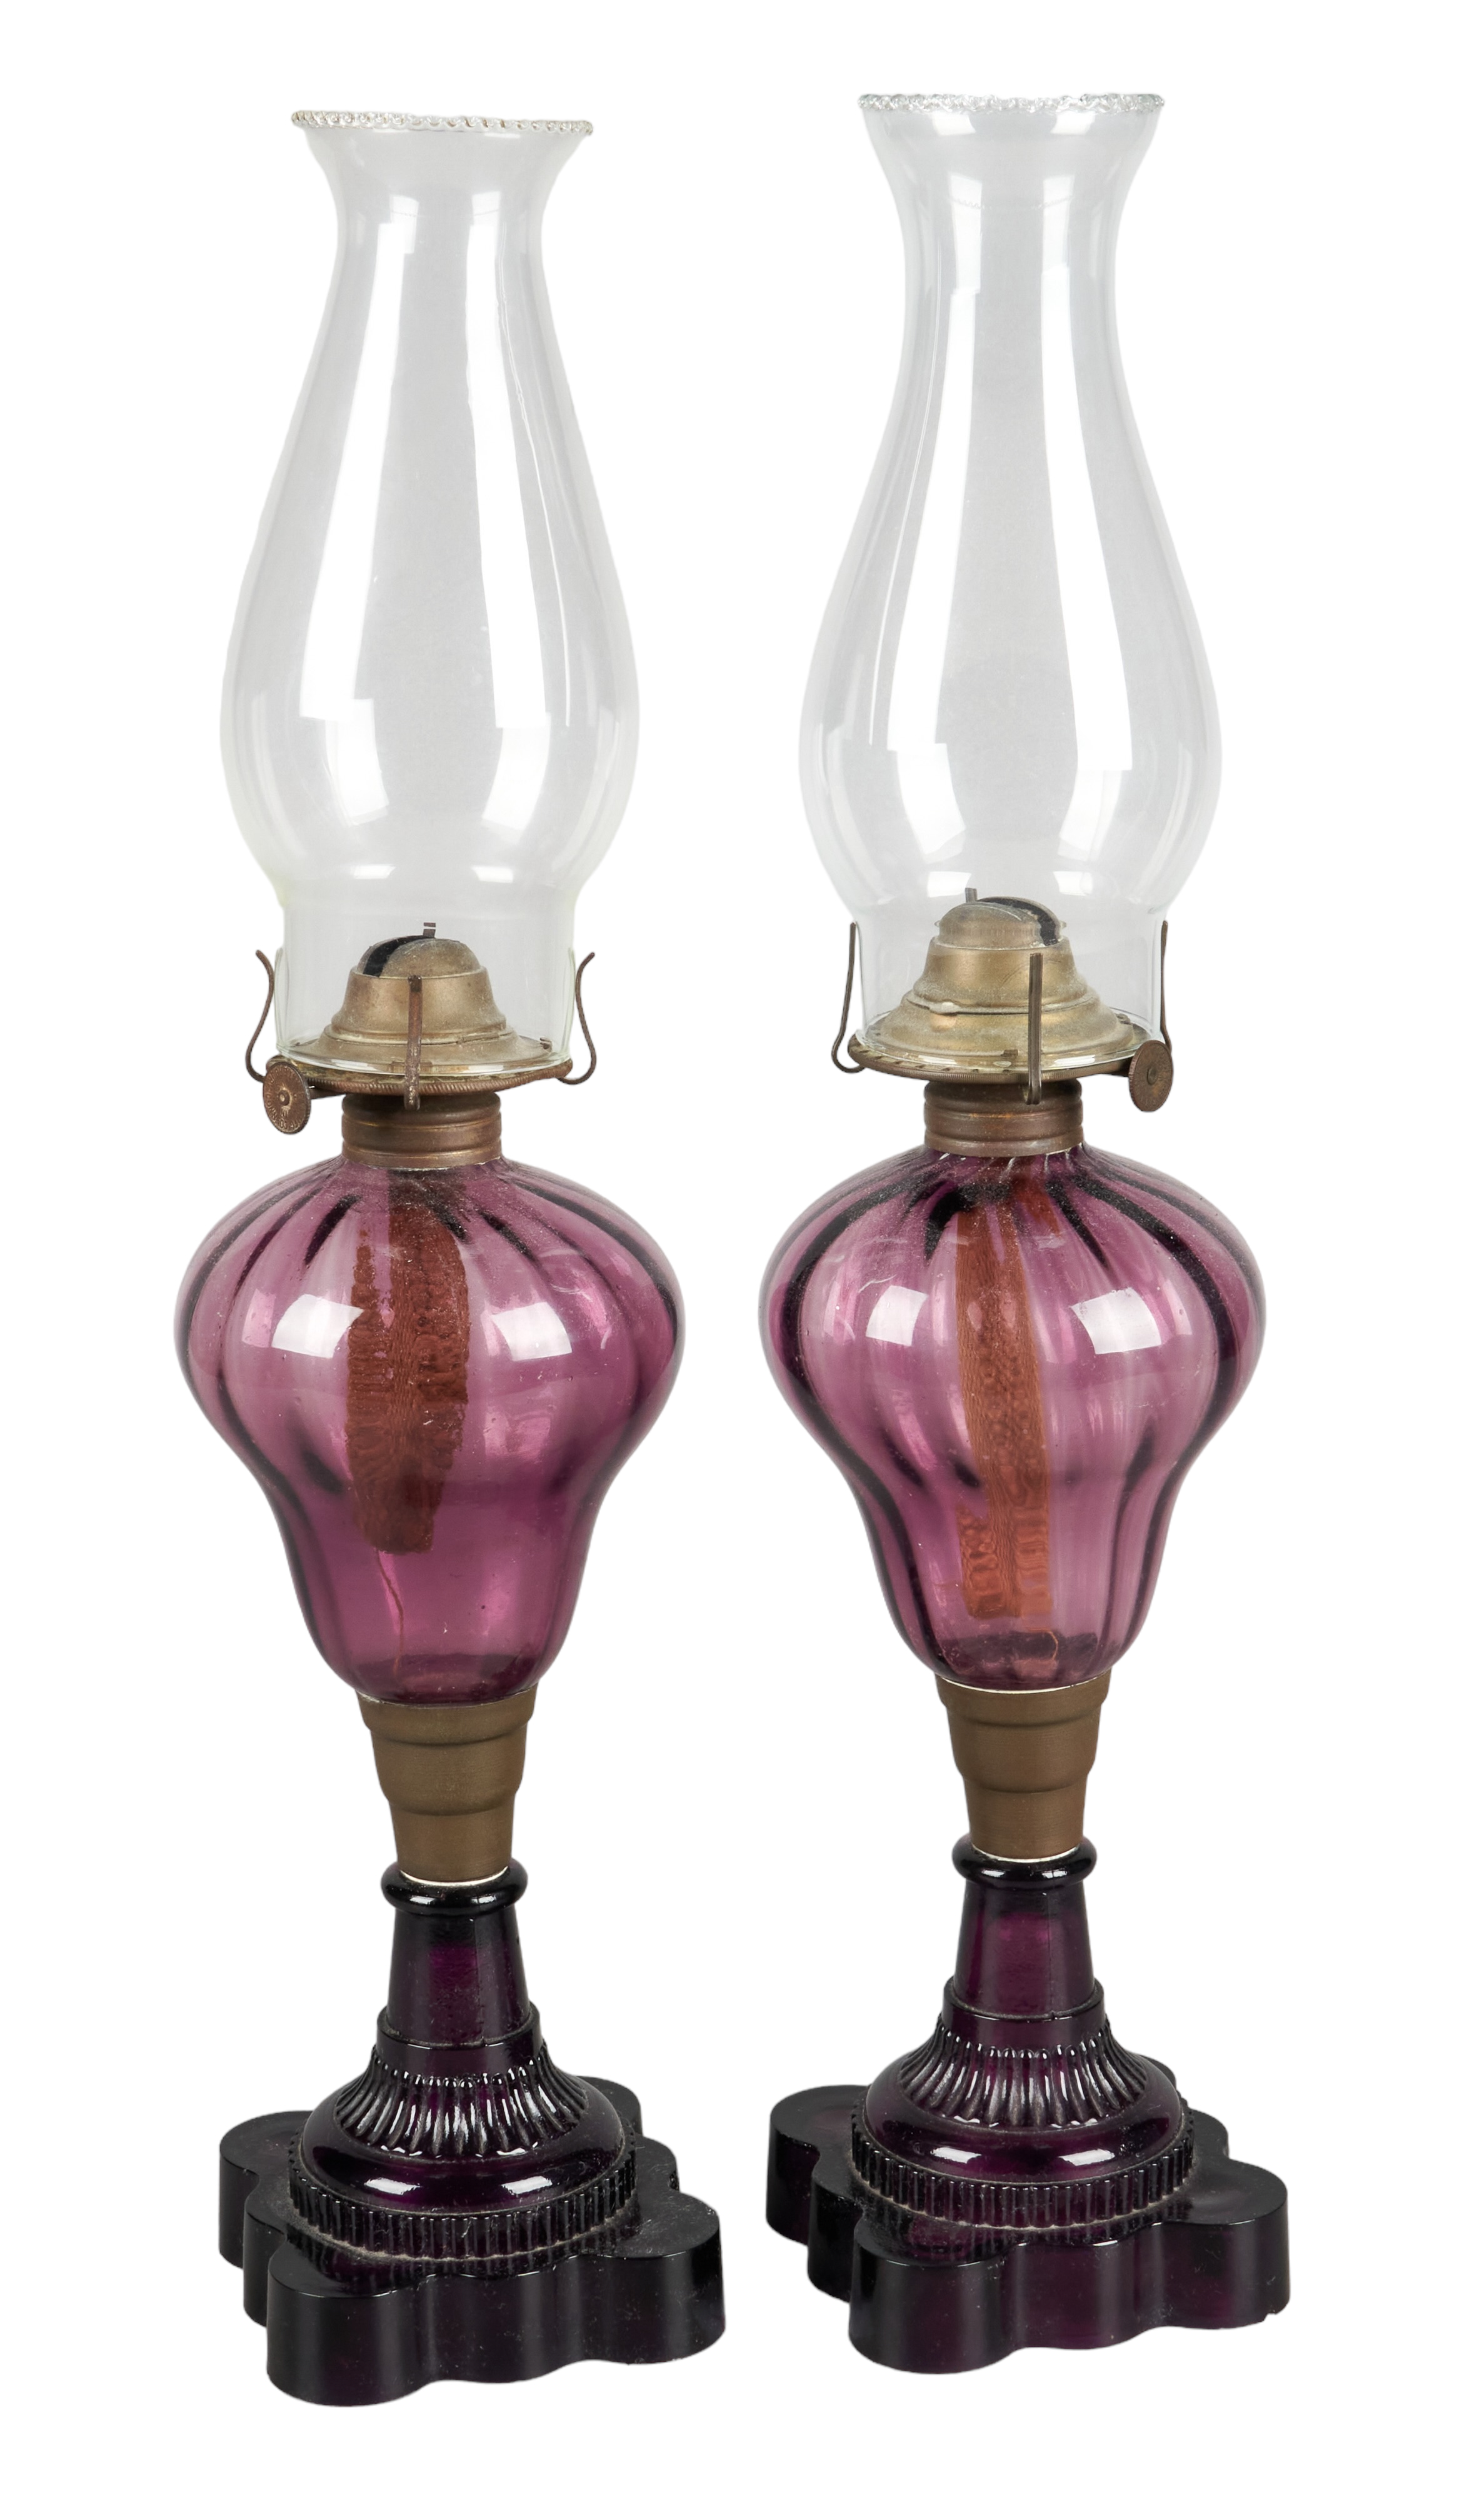 Pair of amethyst glass oil lamps  2e204b